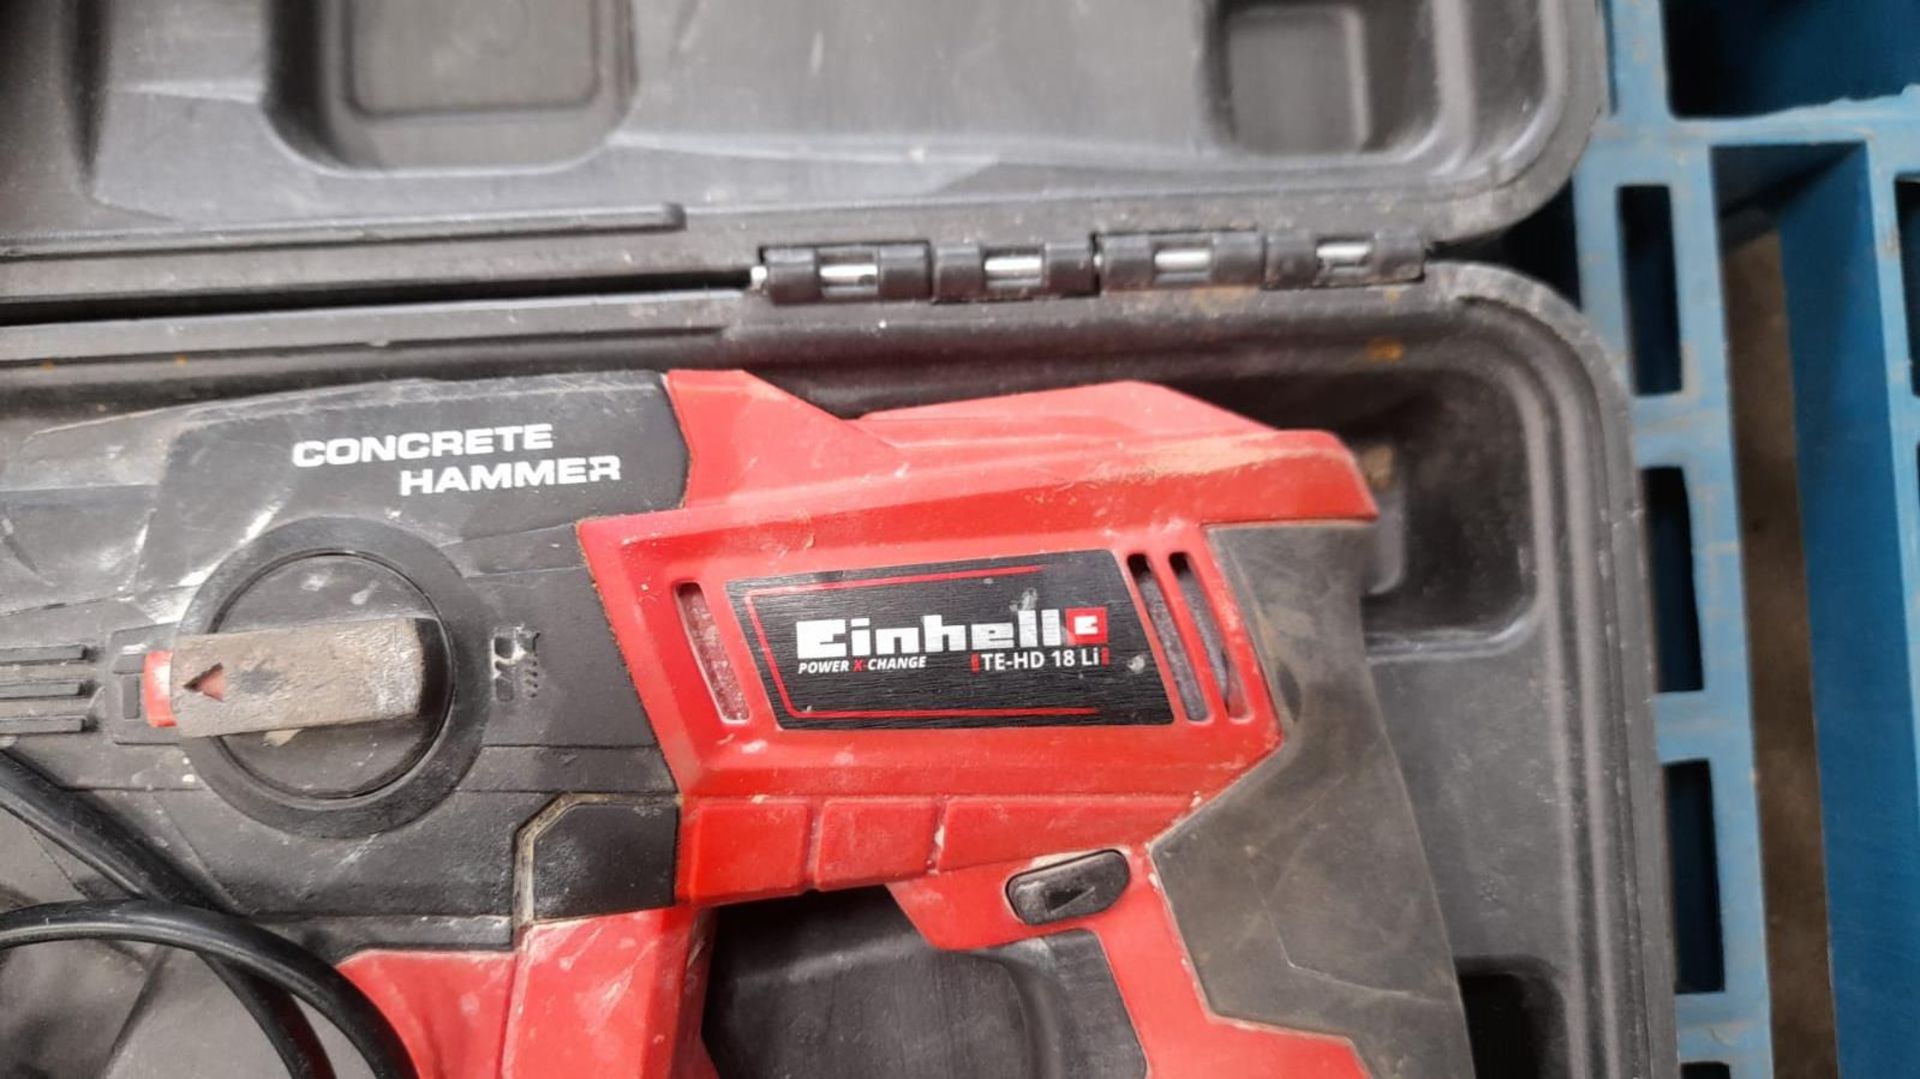 EINHELL HAMMER DRILL, 1.5AMP BATTERY AND CHARGER, DOESN'T RUN UNSURE WHY *PLUS VAT* - Image 2 of 2